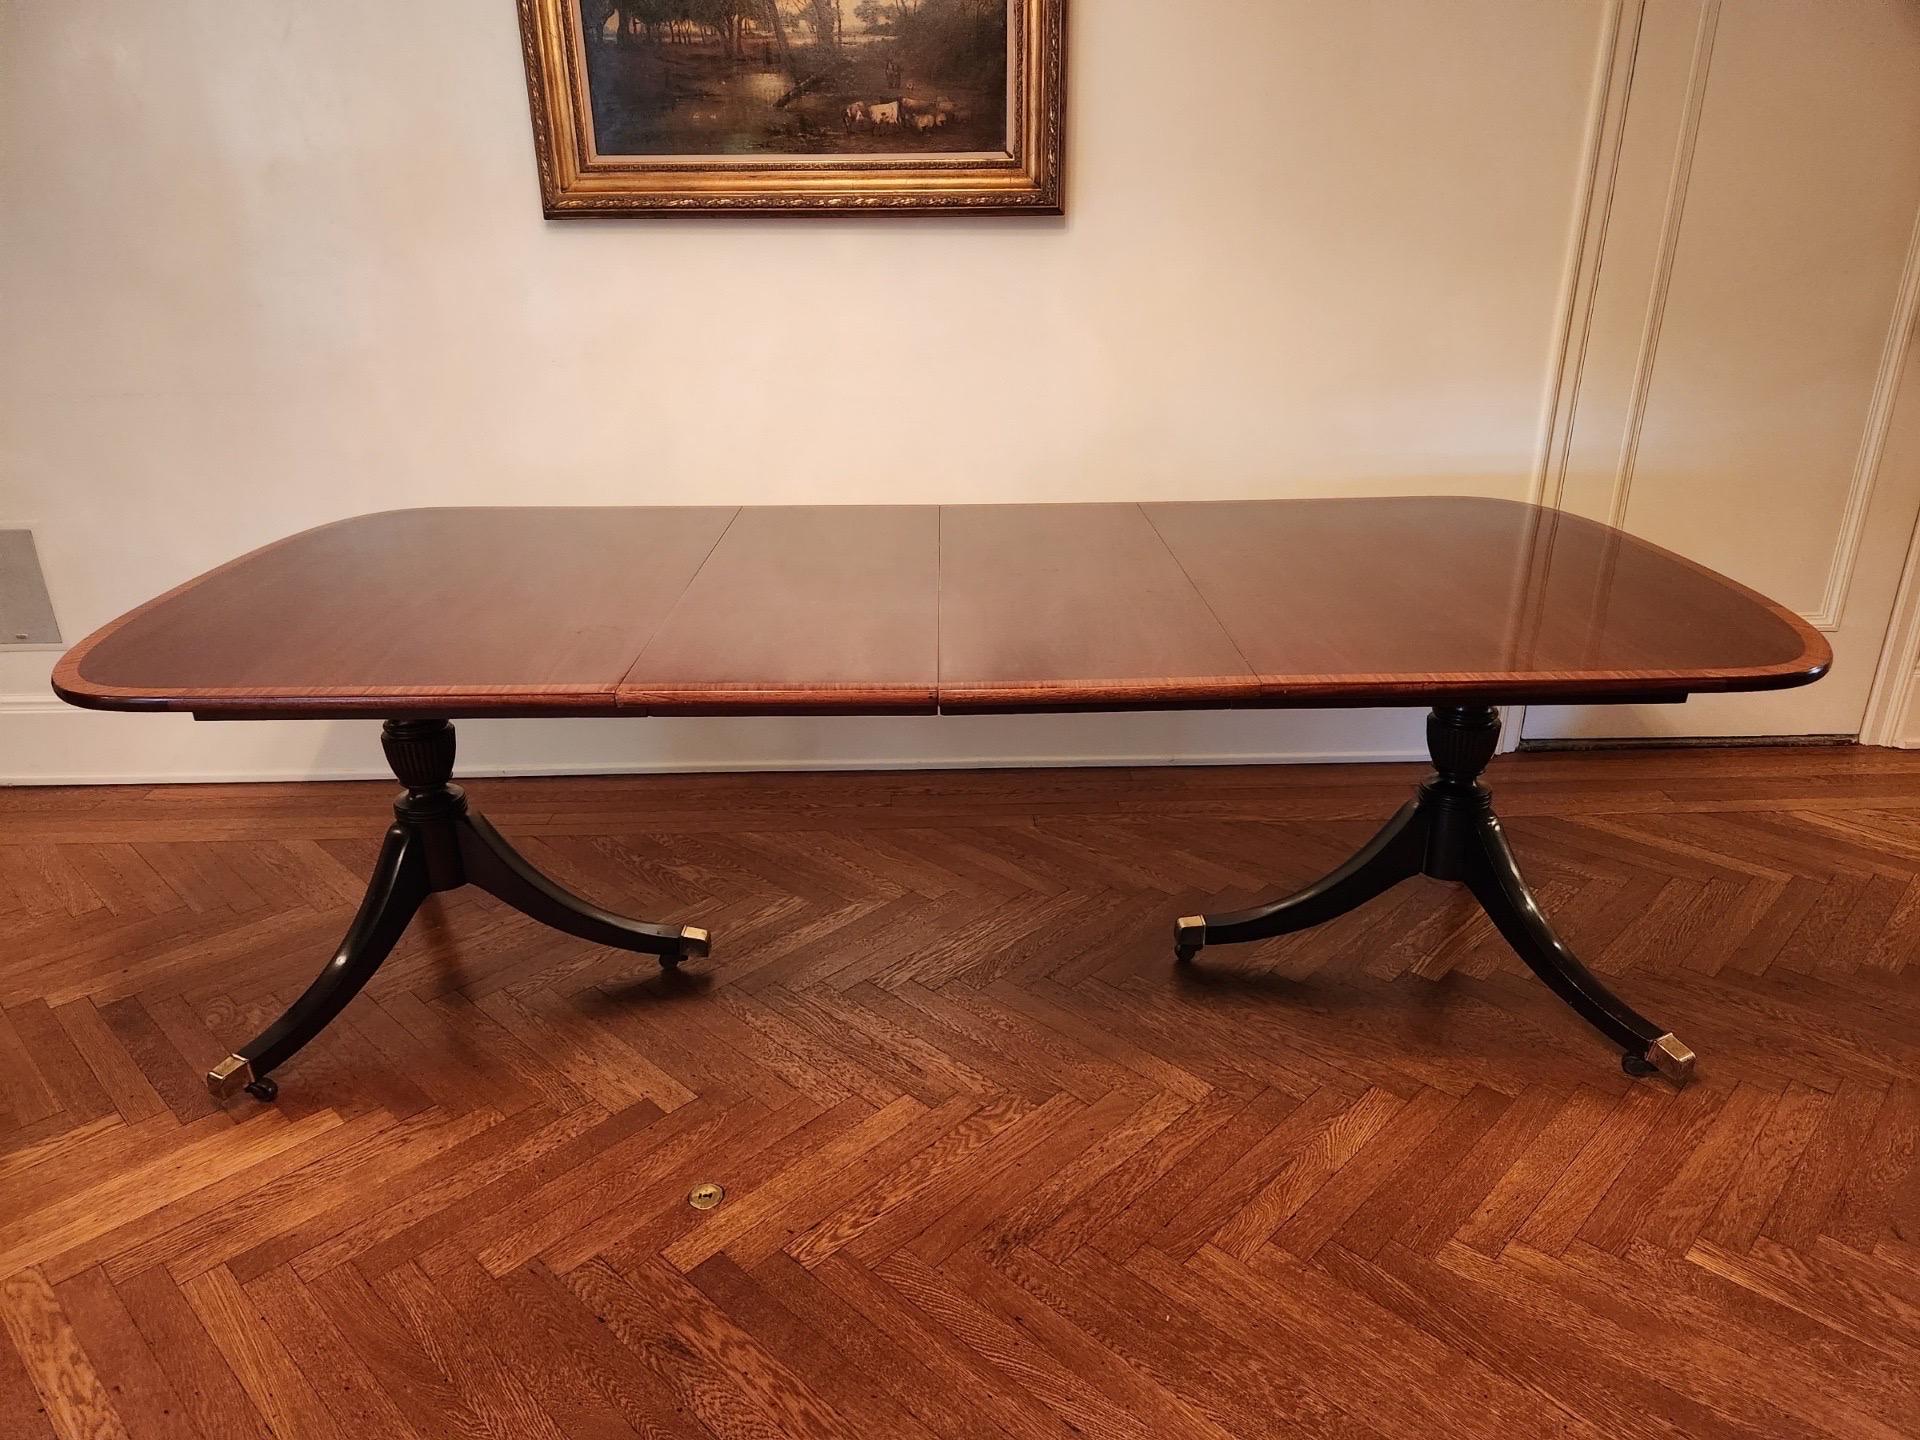 George III Style Mahogany Double Pedestal Dining Table with Inlaid Cross Banding, 20th Century
A very nice and well proportioned George III style reproduction dining table with double splayed pedestal bases ending with brass feet on casters. A